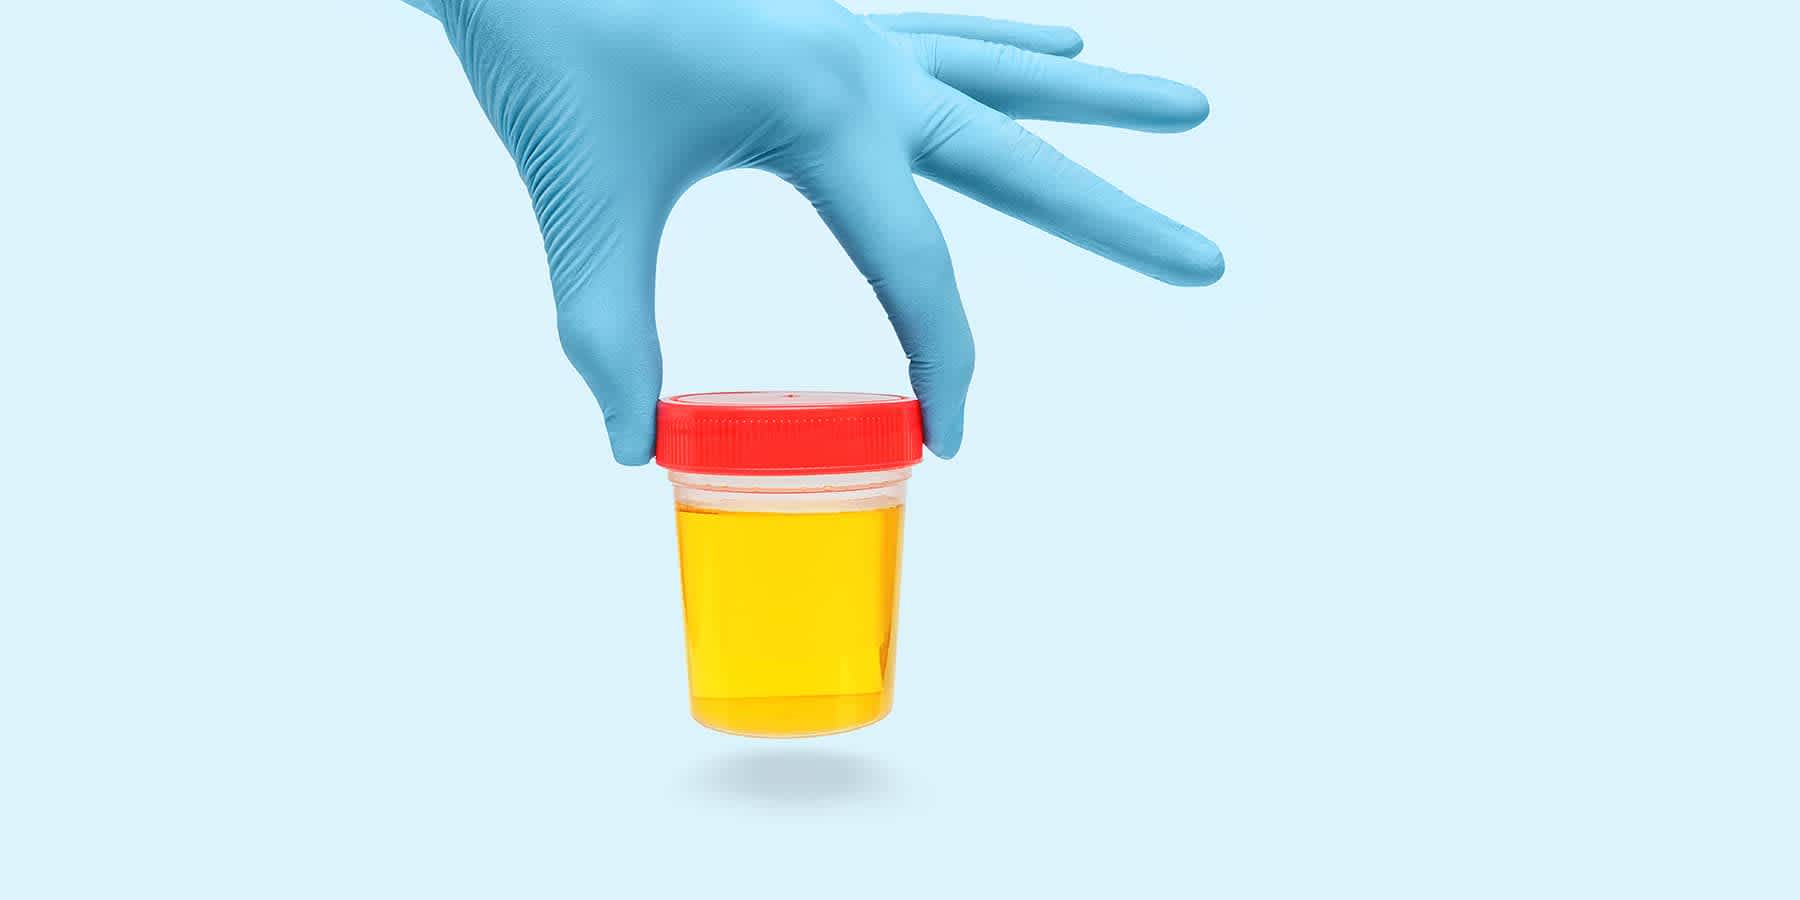 Gloved hand holding urine sample used for gonorrhea test